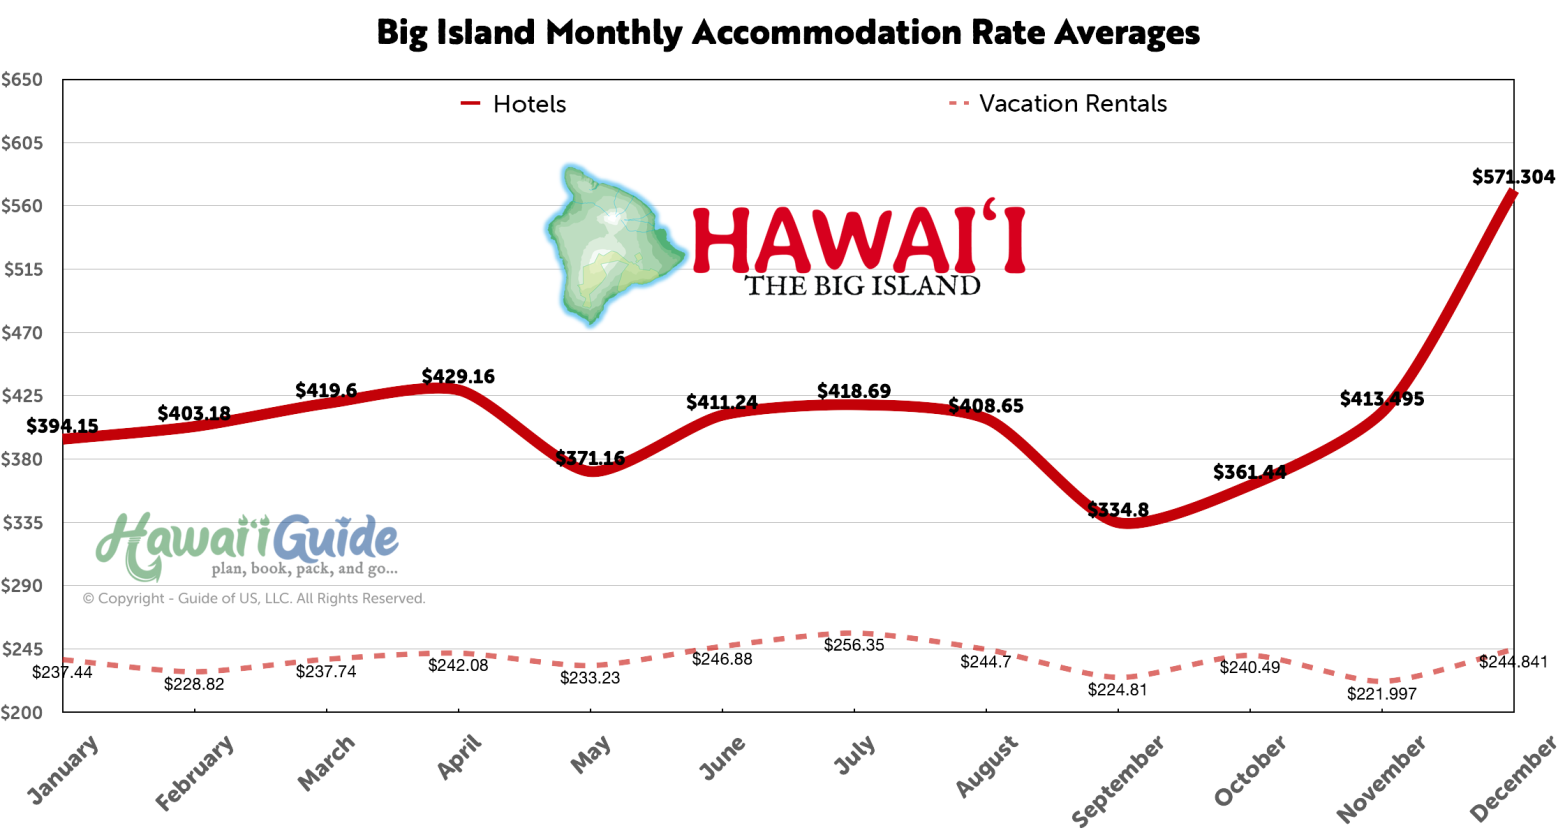 Big Island Accommodation Rates (click to enlarge)